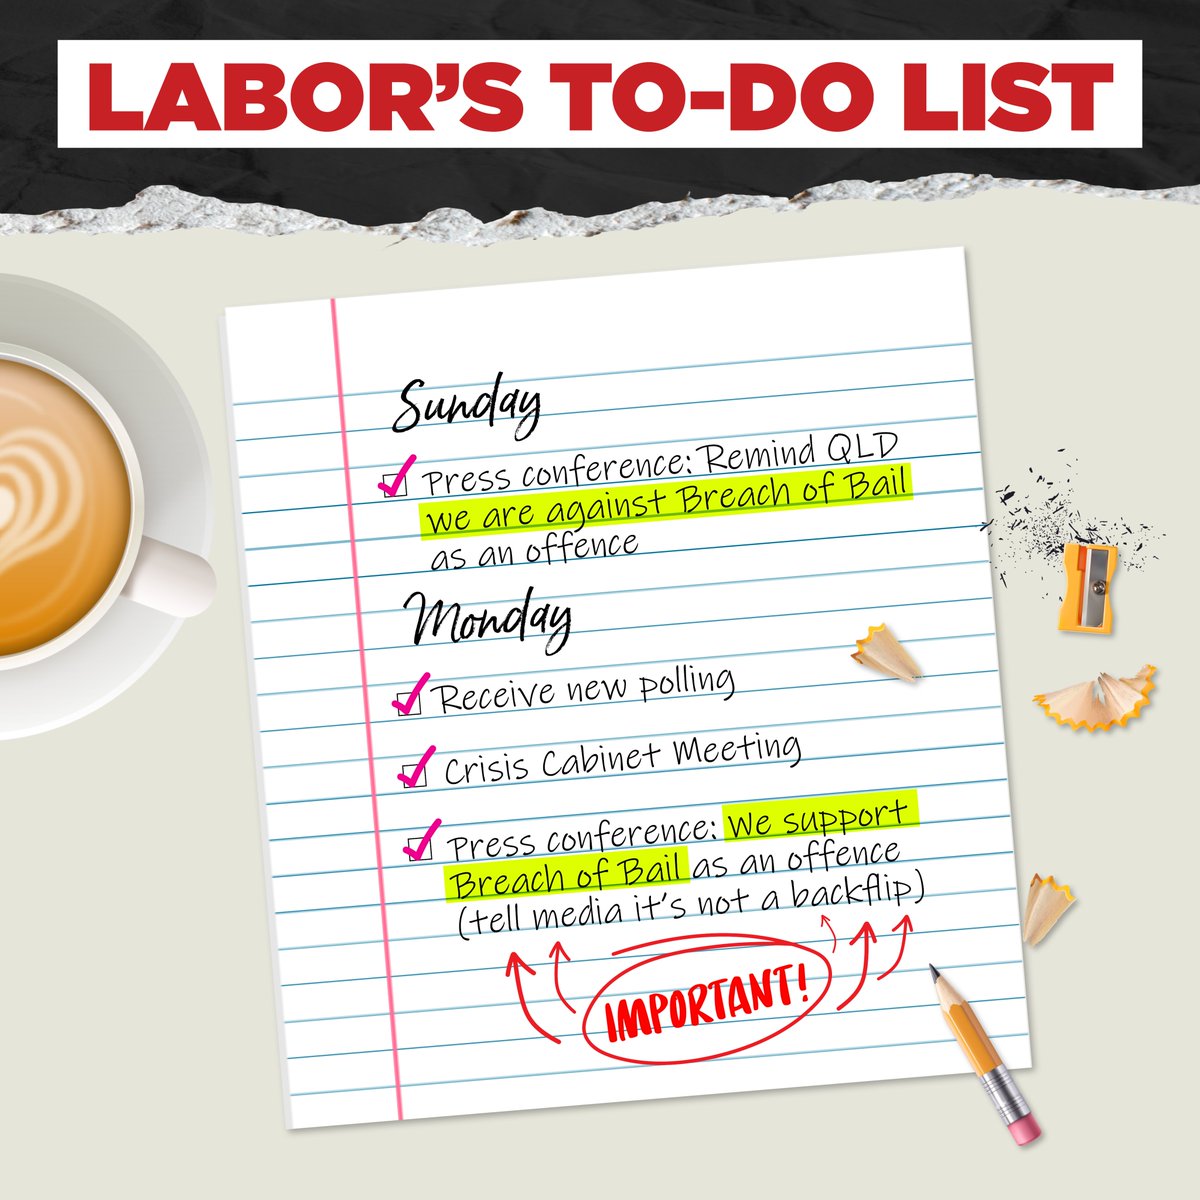 LNP – Liberal National Party: BREAKING: Labor’s internal to-do list has been leaked. …